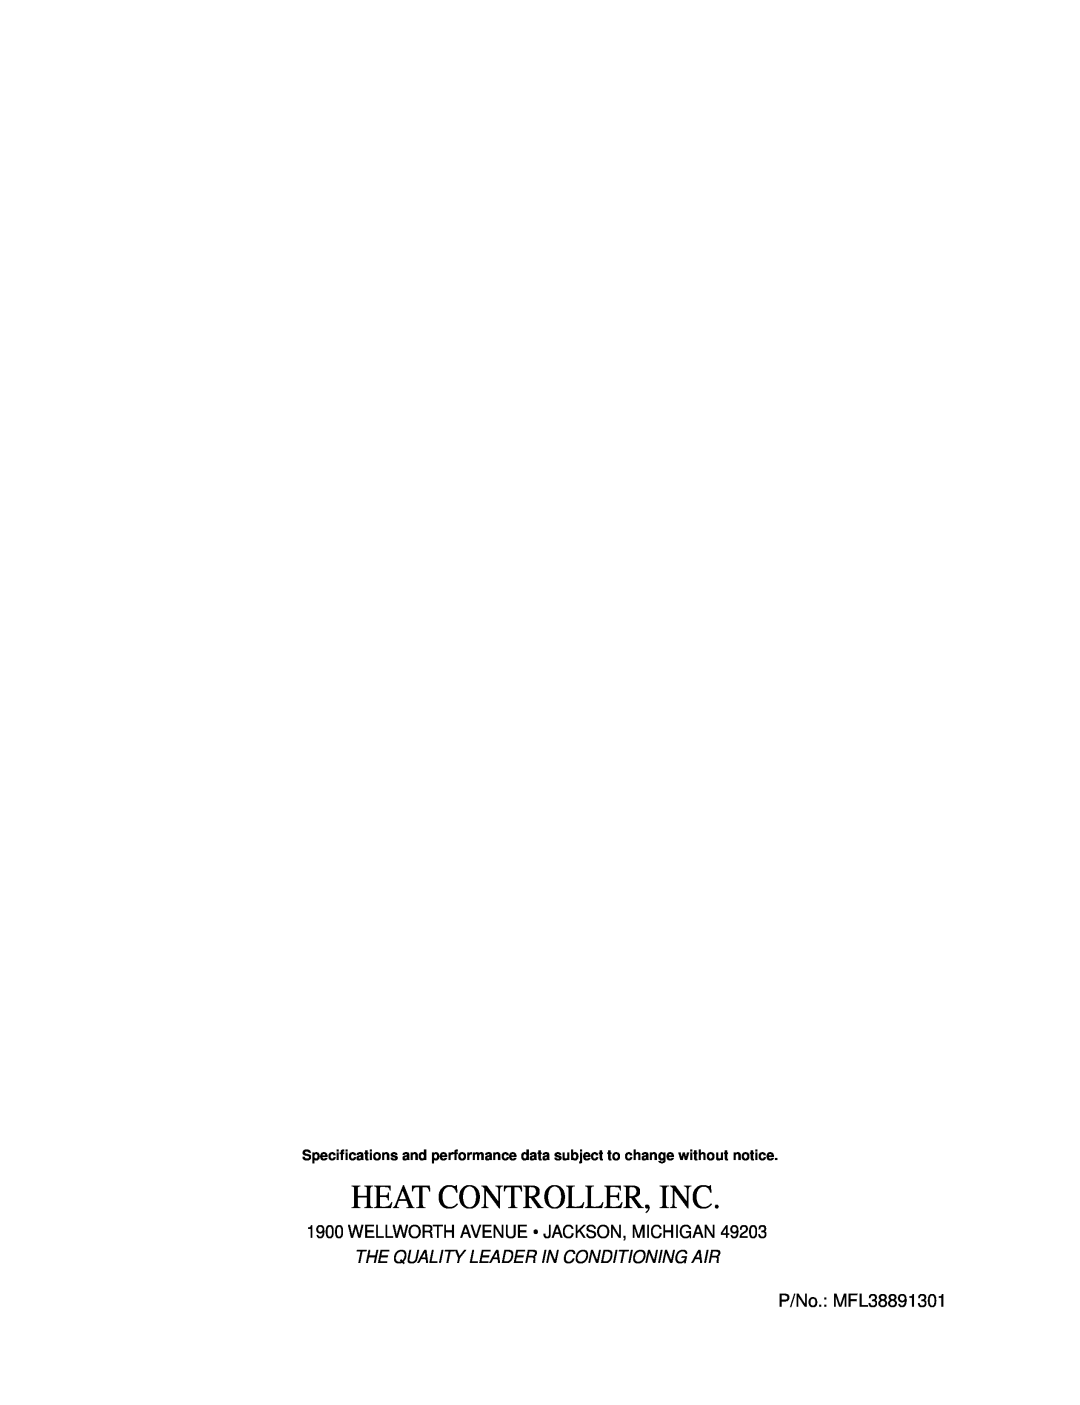 Heat Controller BHD-651-D Heat Controller, Inc, Wellworth Avenue Jackson, Michigan, The Quality Leader In Conditioning Air 